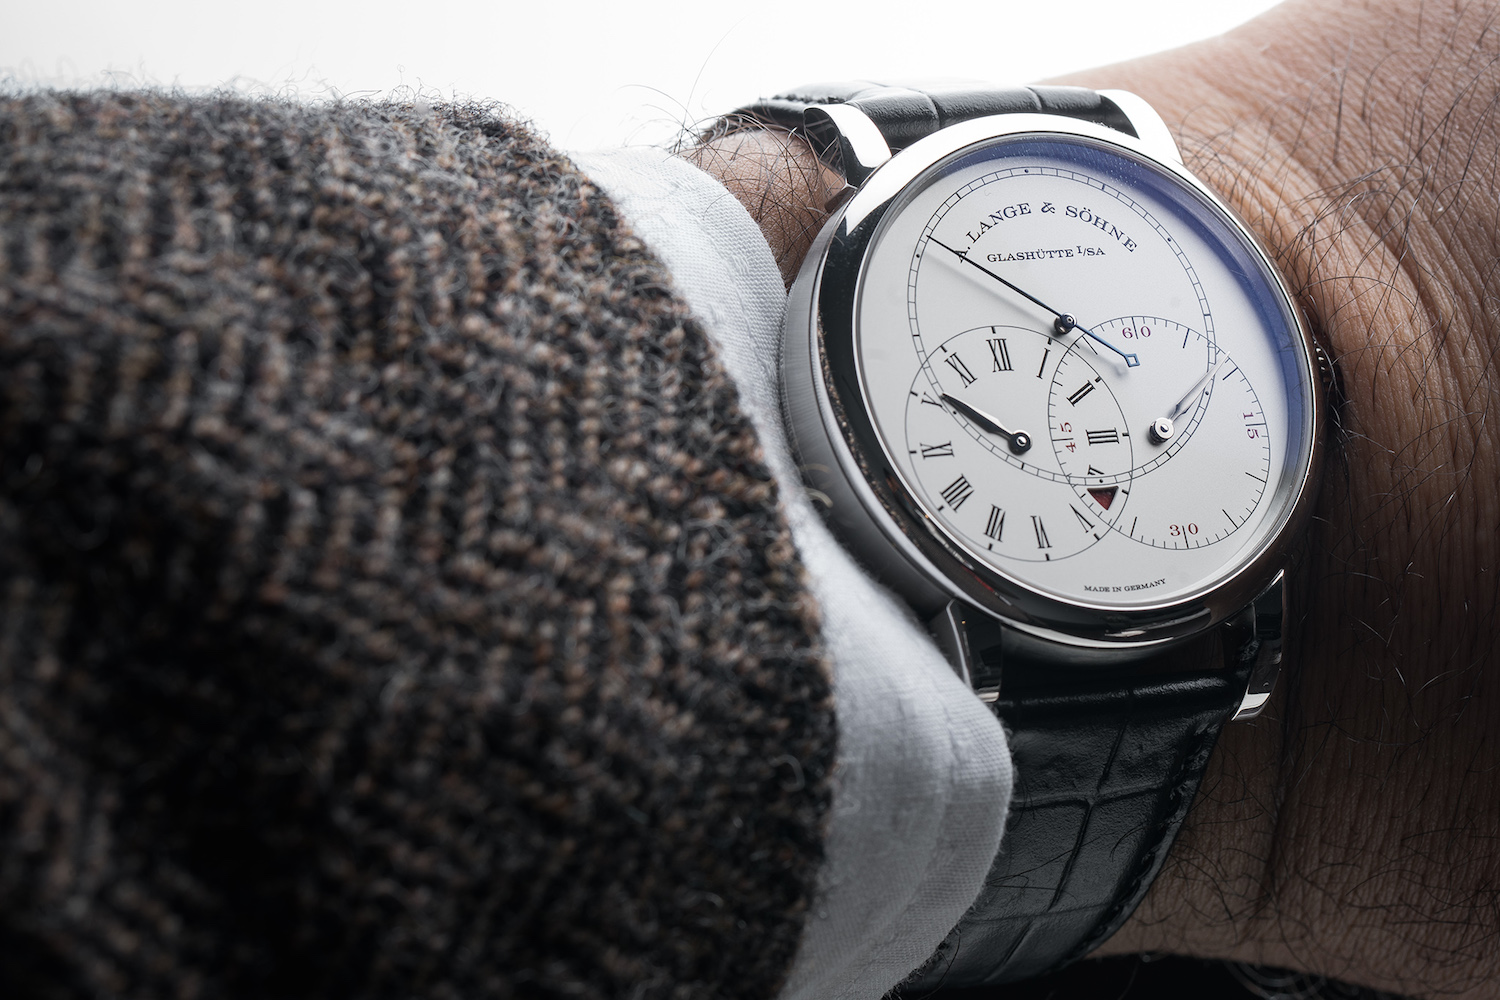 Hands On With The A. Lange & Söhne Richard Lange Jumping Seconds